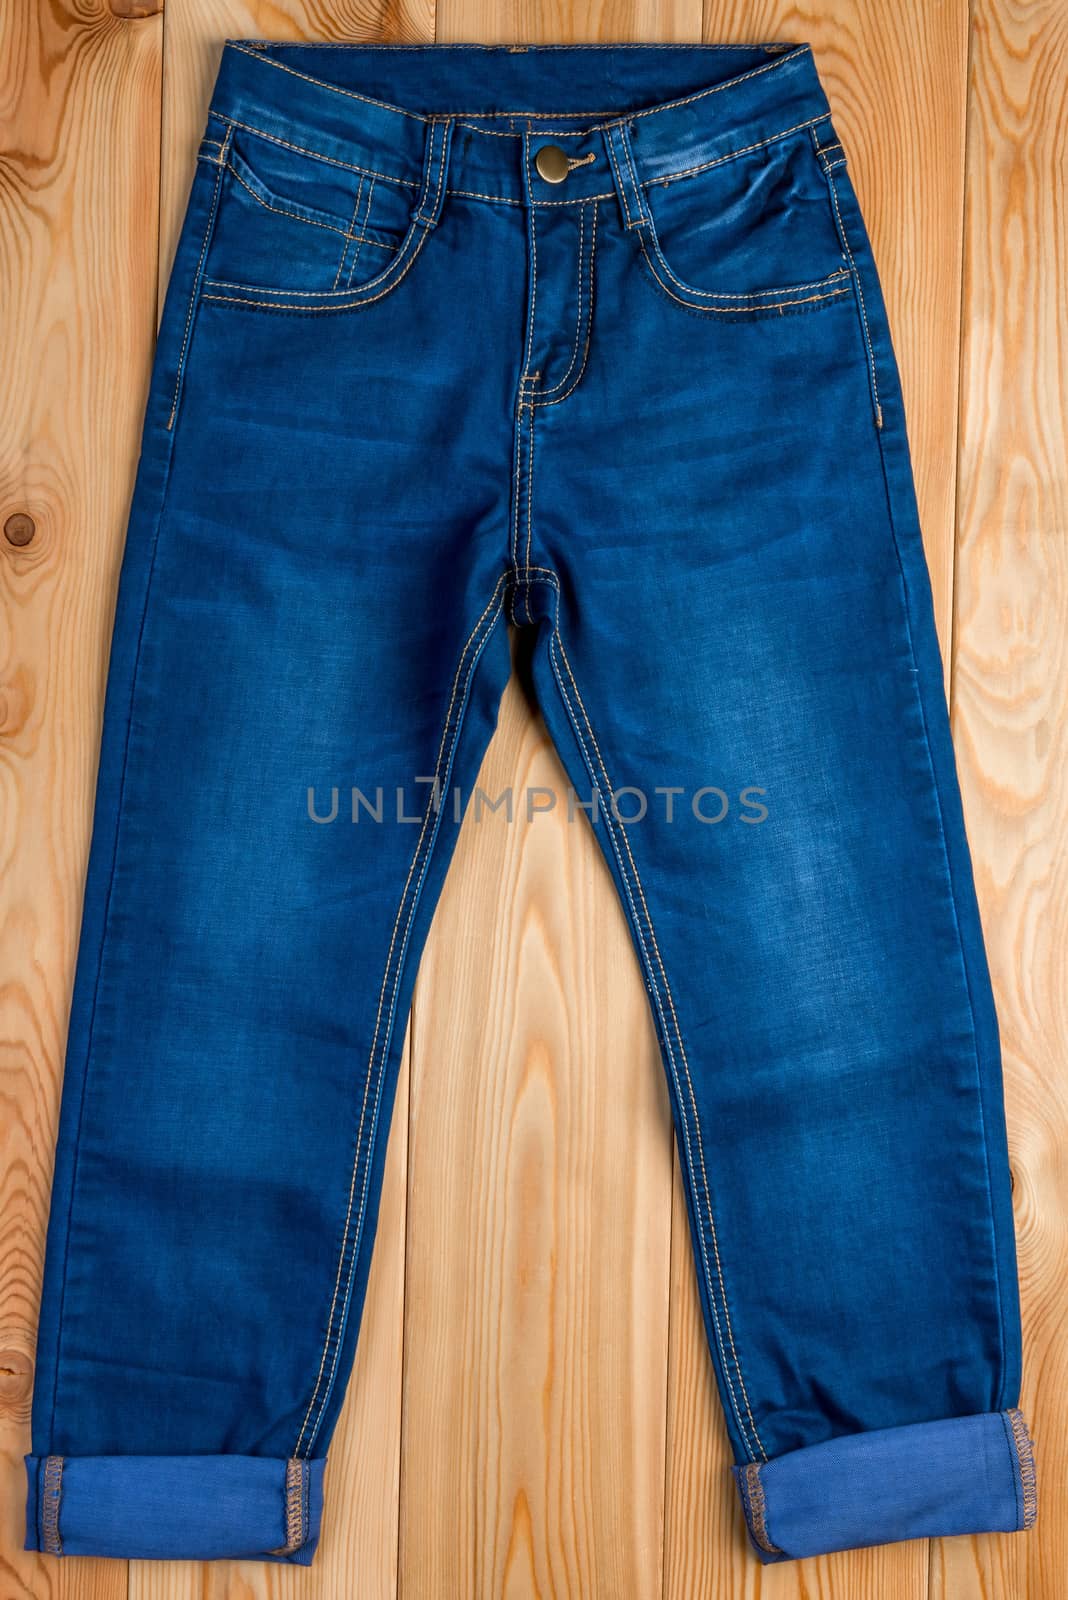 dark blue jeans for a boy on a wooden floor top view